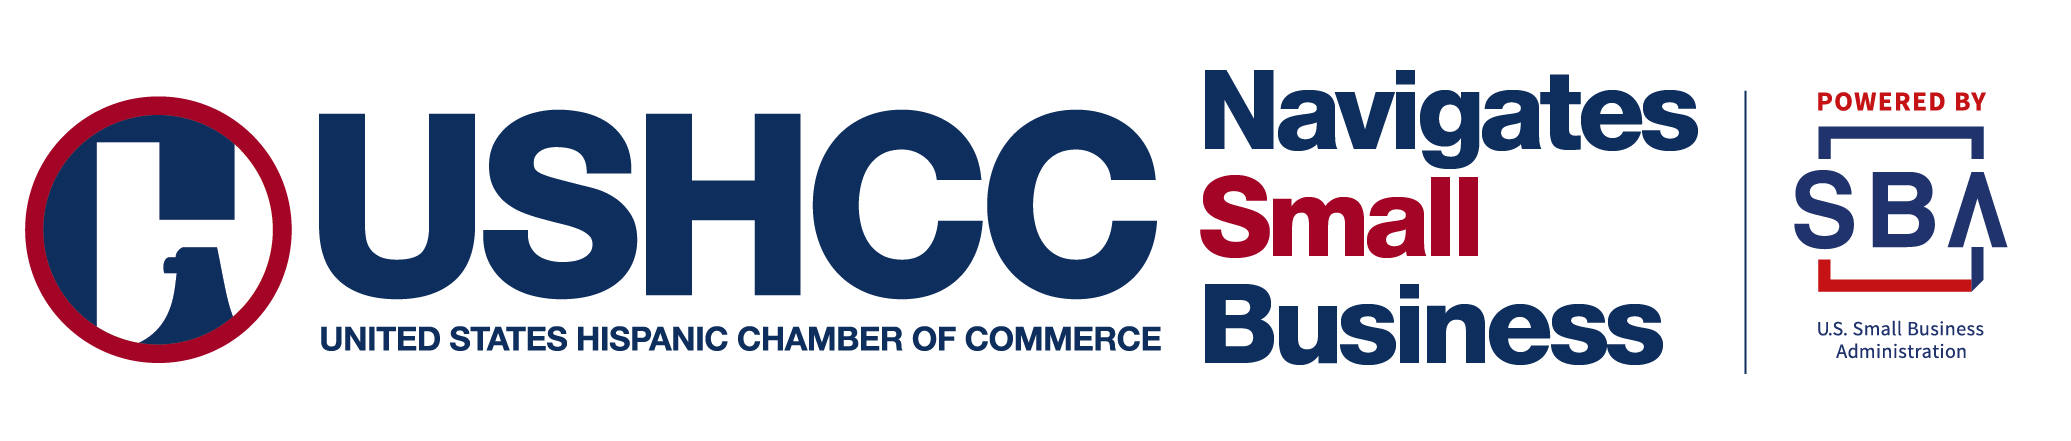 United States Hispanic Chamber of Commerce Navigates Small Business, Powered By: USA Small Business Administration